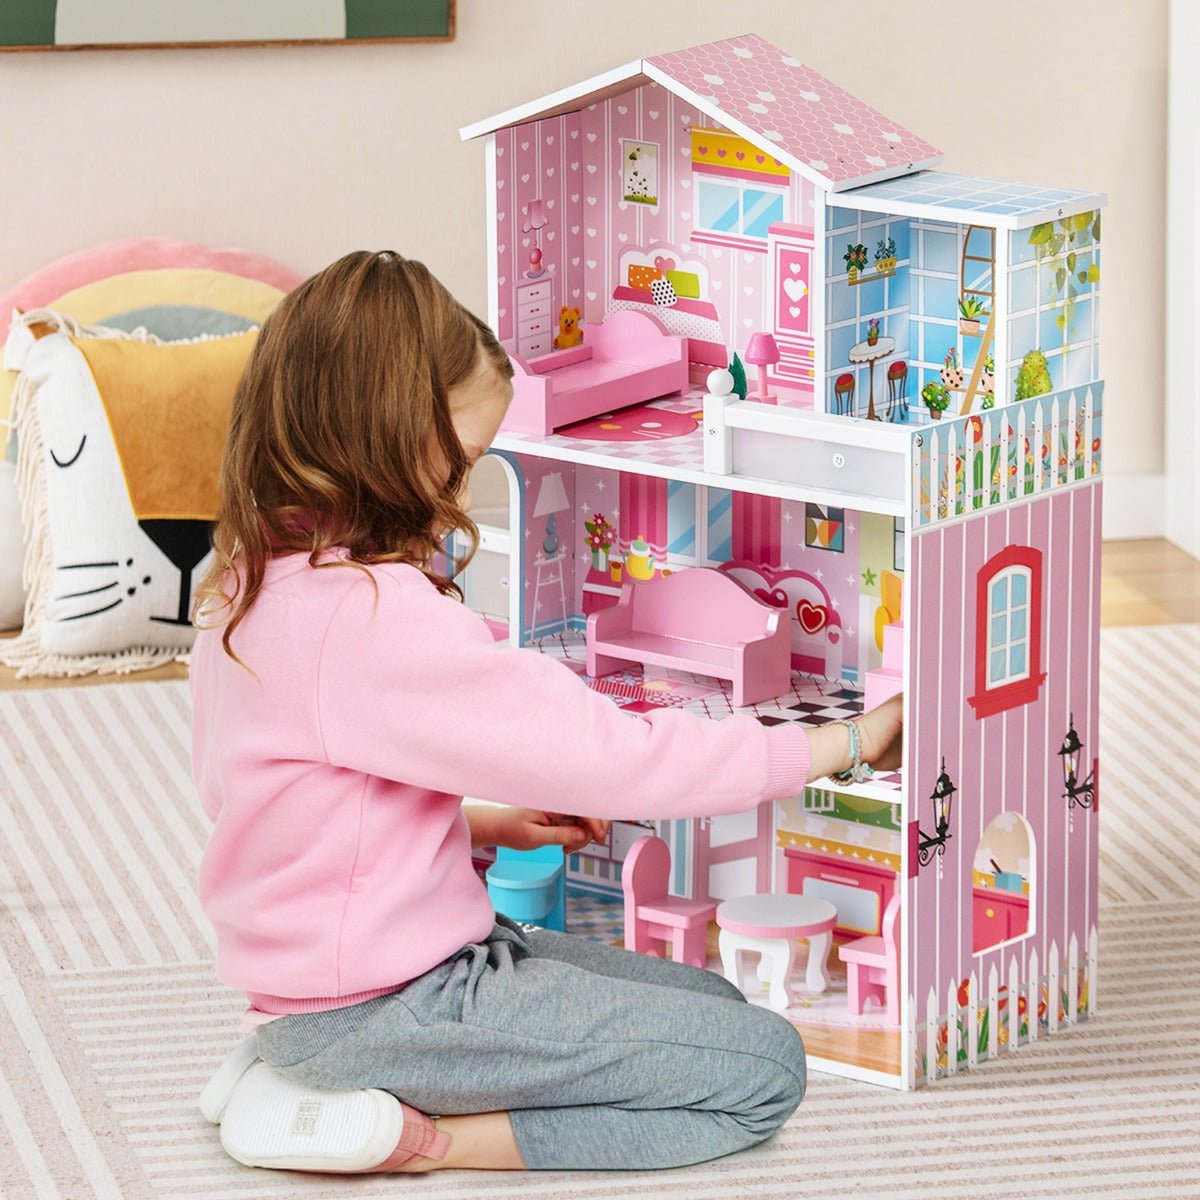 Pink Wooden Dollhouse: A World of Imagination